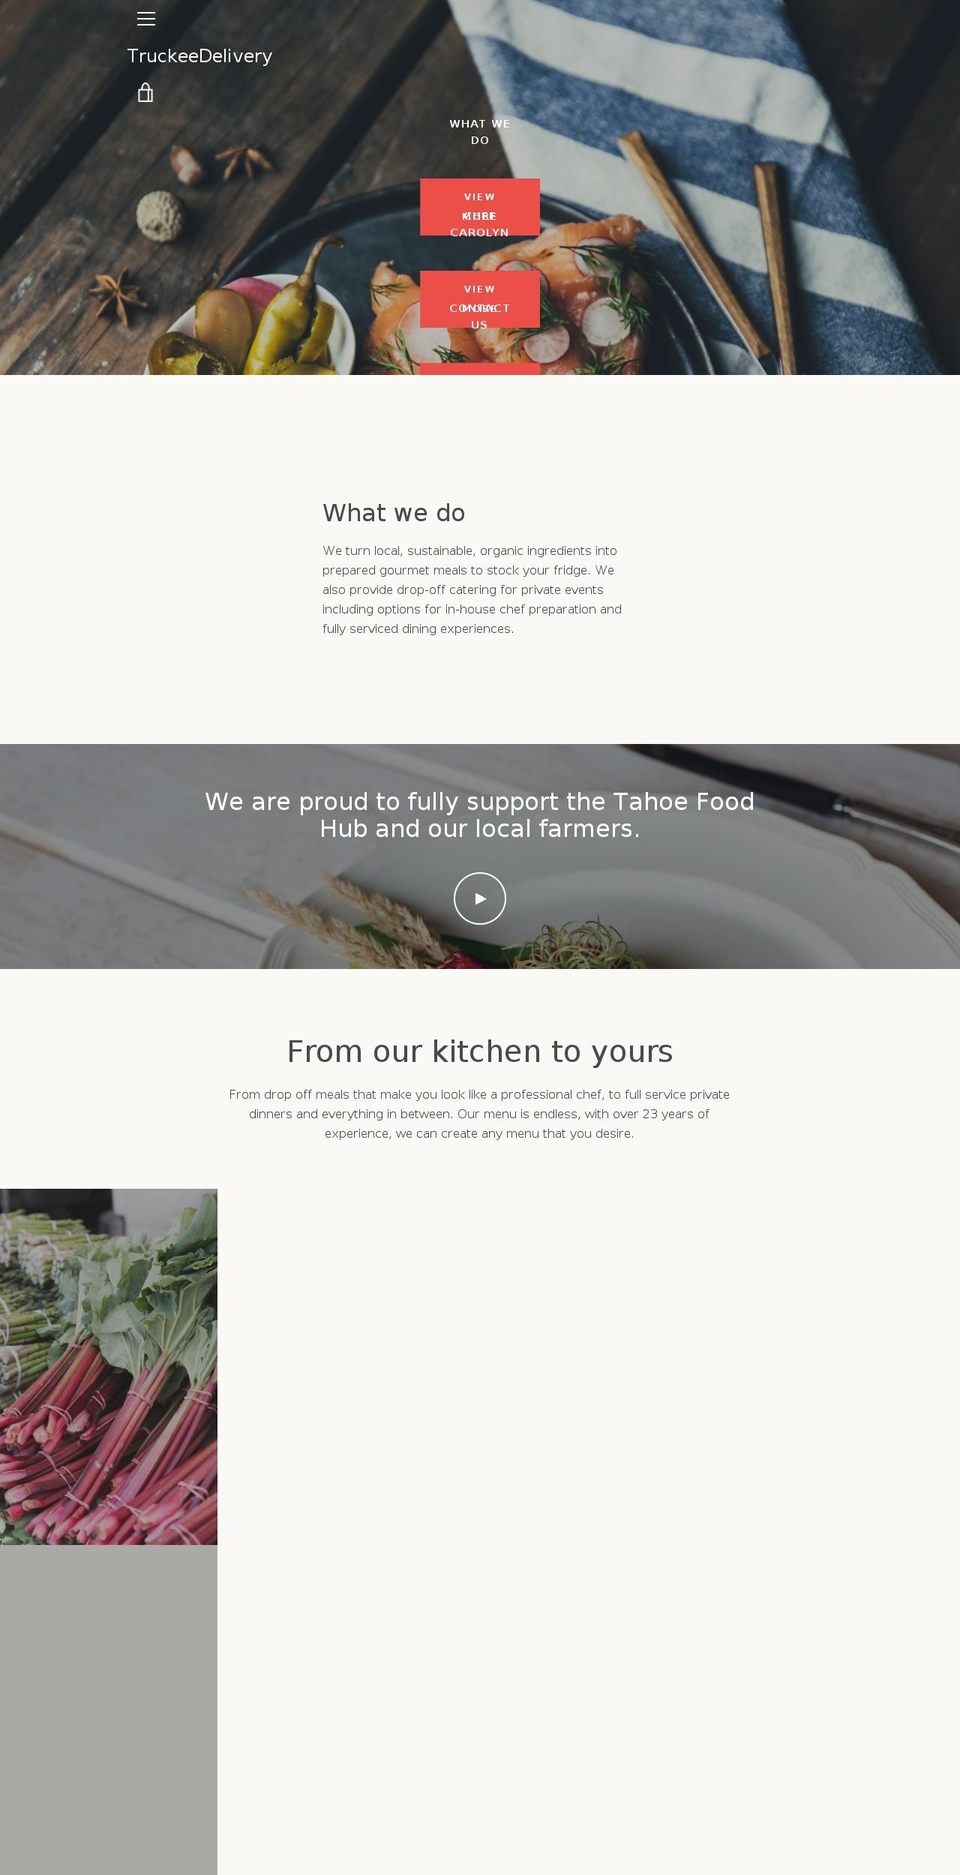 truckee.delivery shopify website screenshot